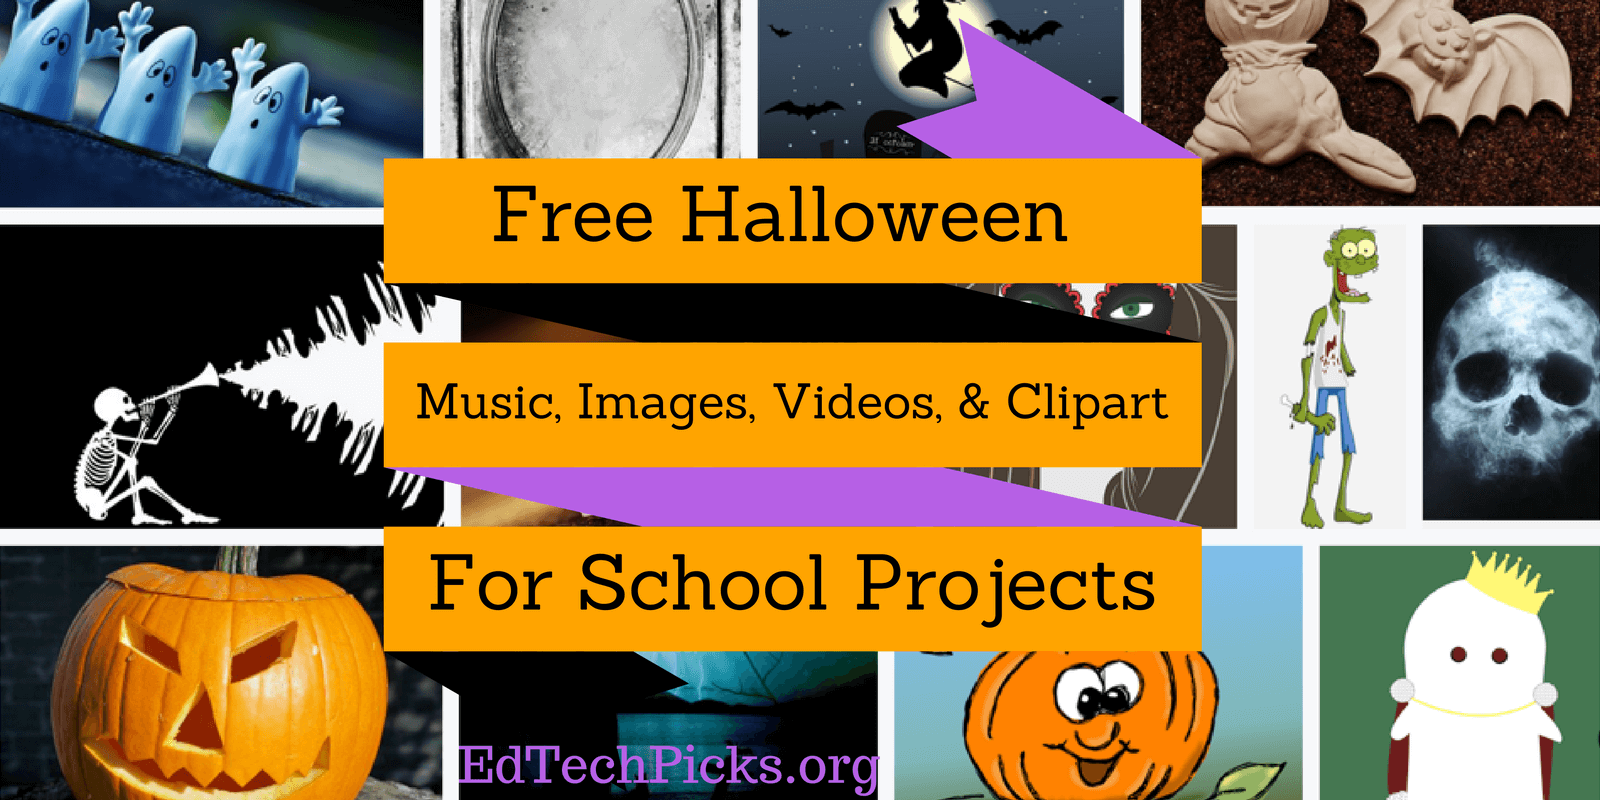 free clipart images for school projects - photo #43